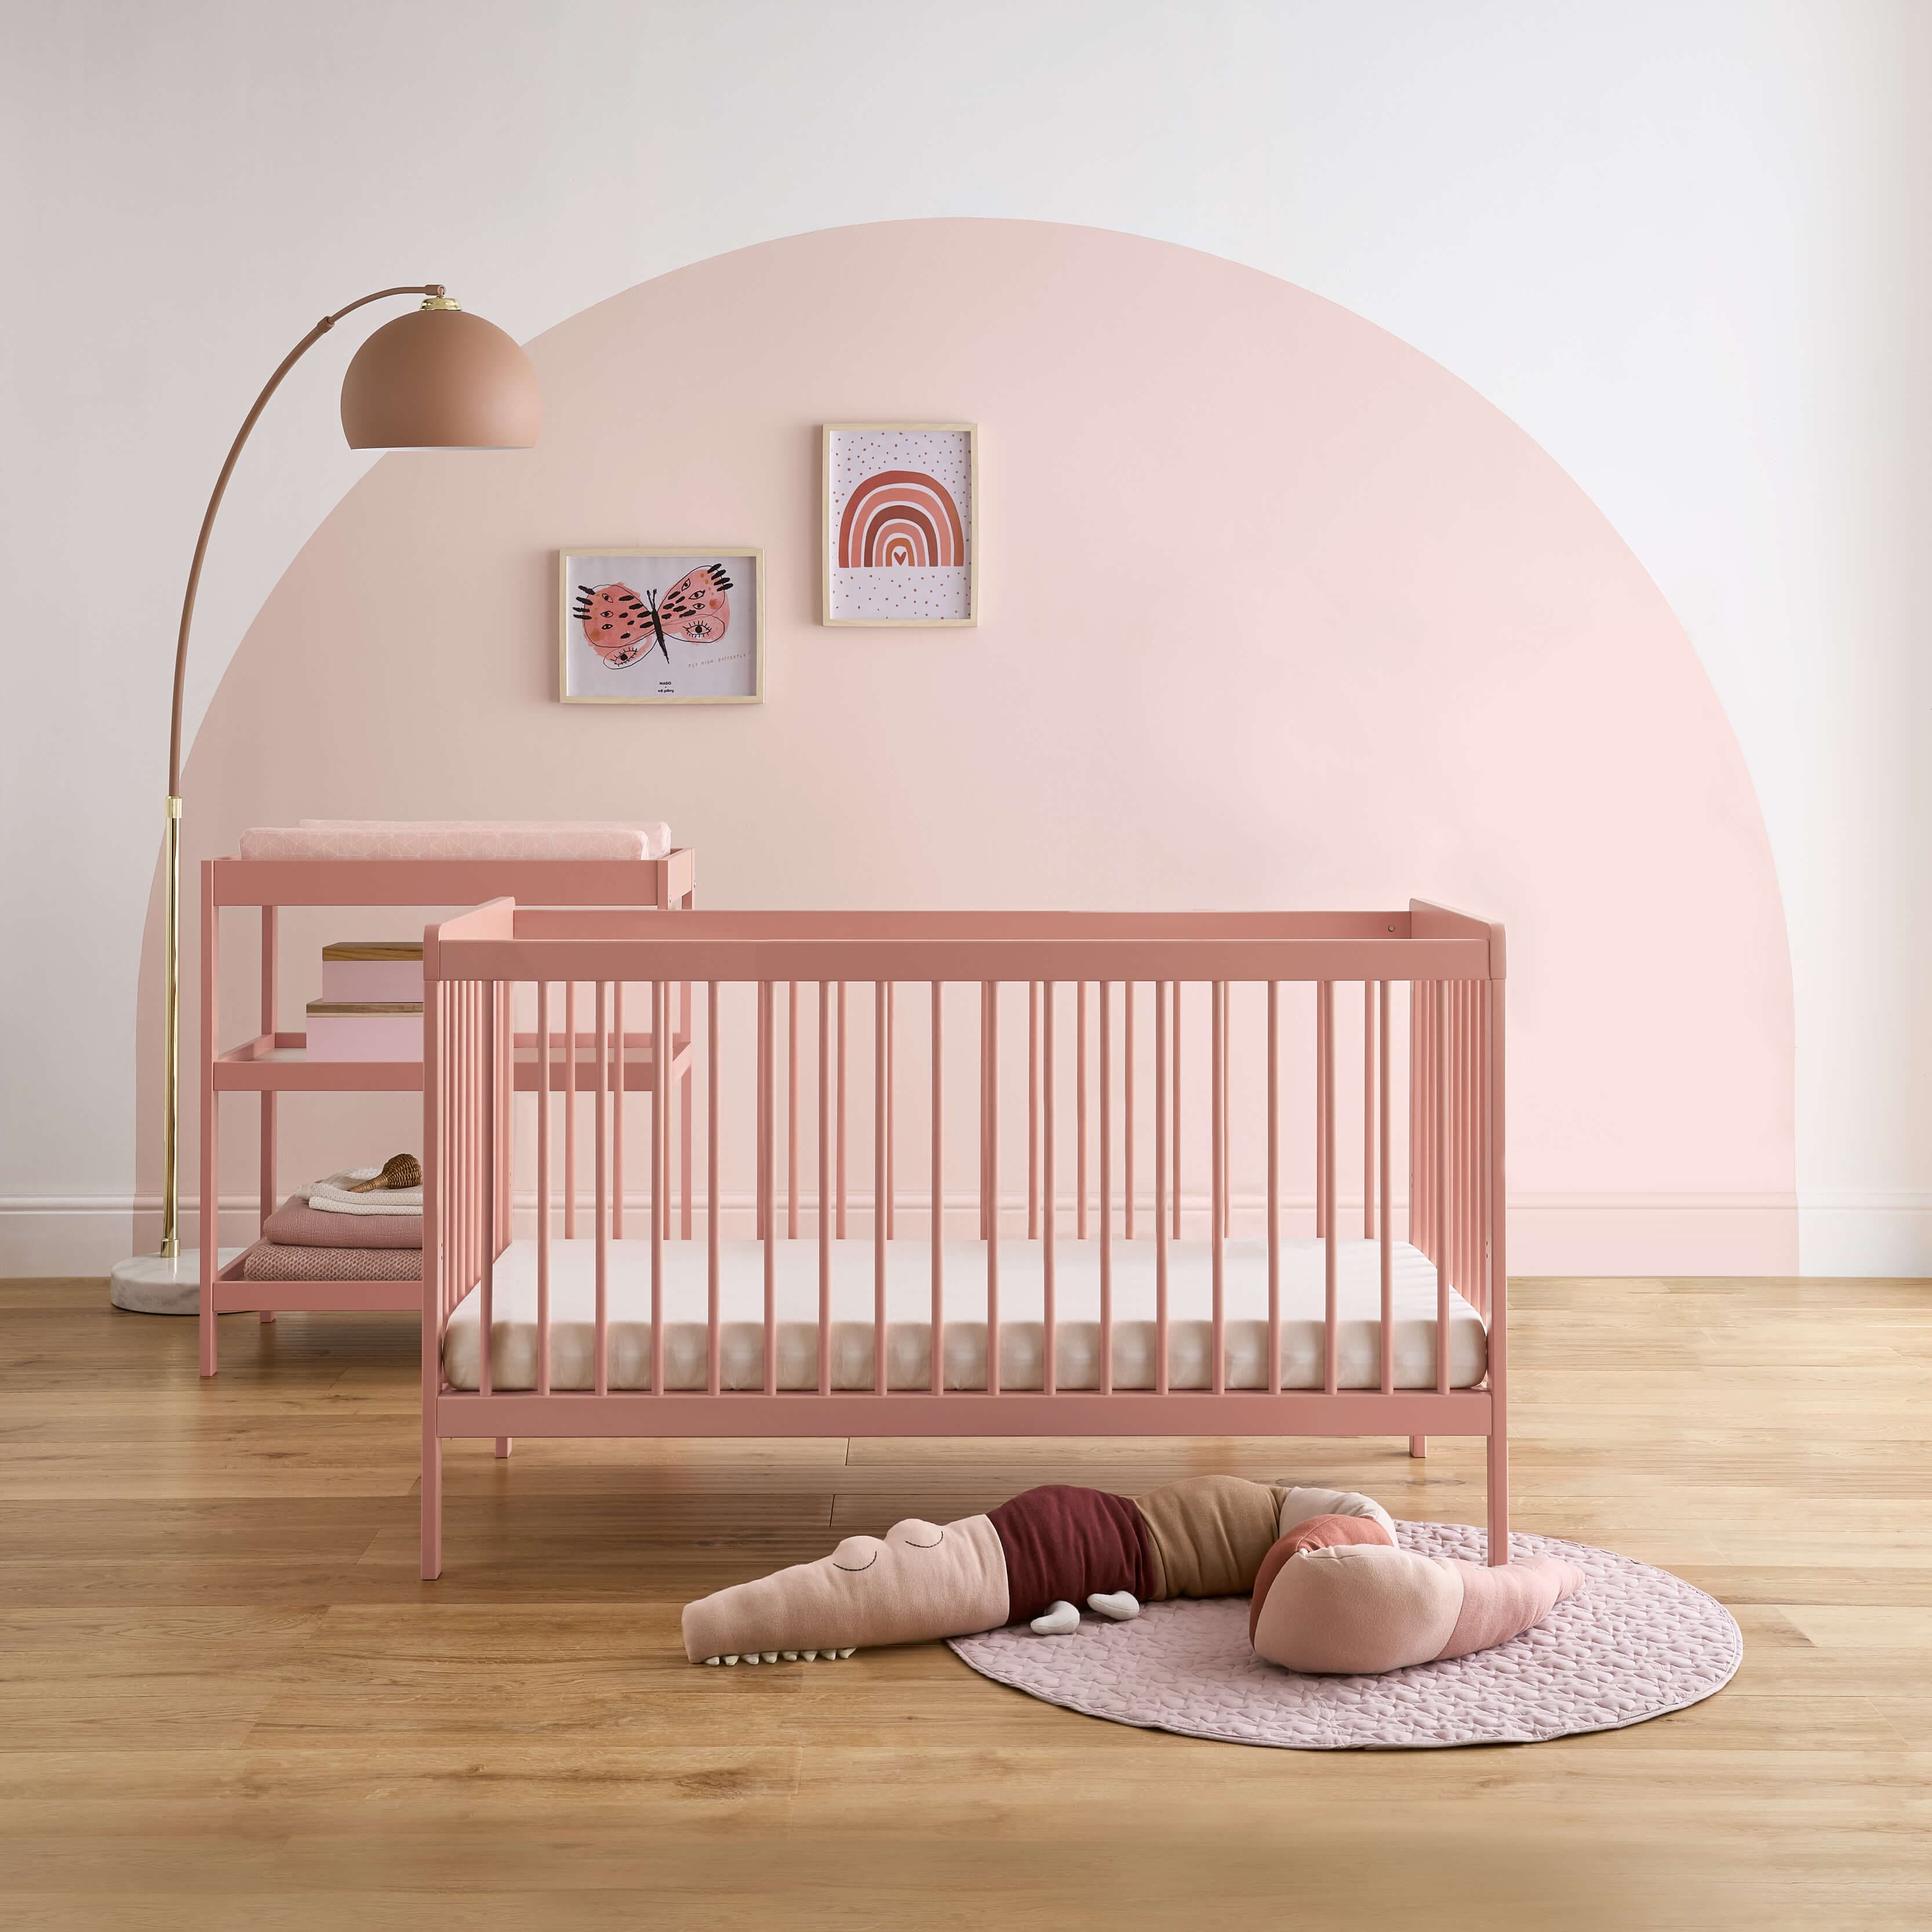 Cuddleco Nola 2 Piece Nursery Furniture Set - Blush Pink - For Your Little One